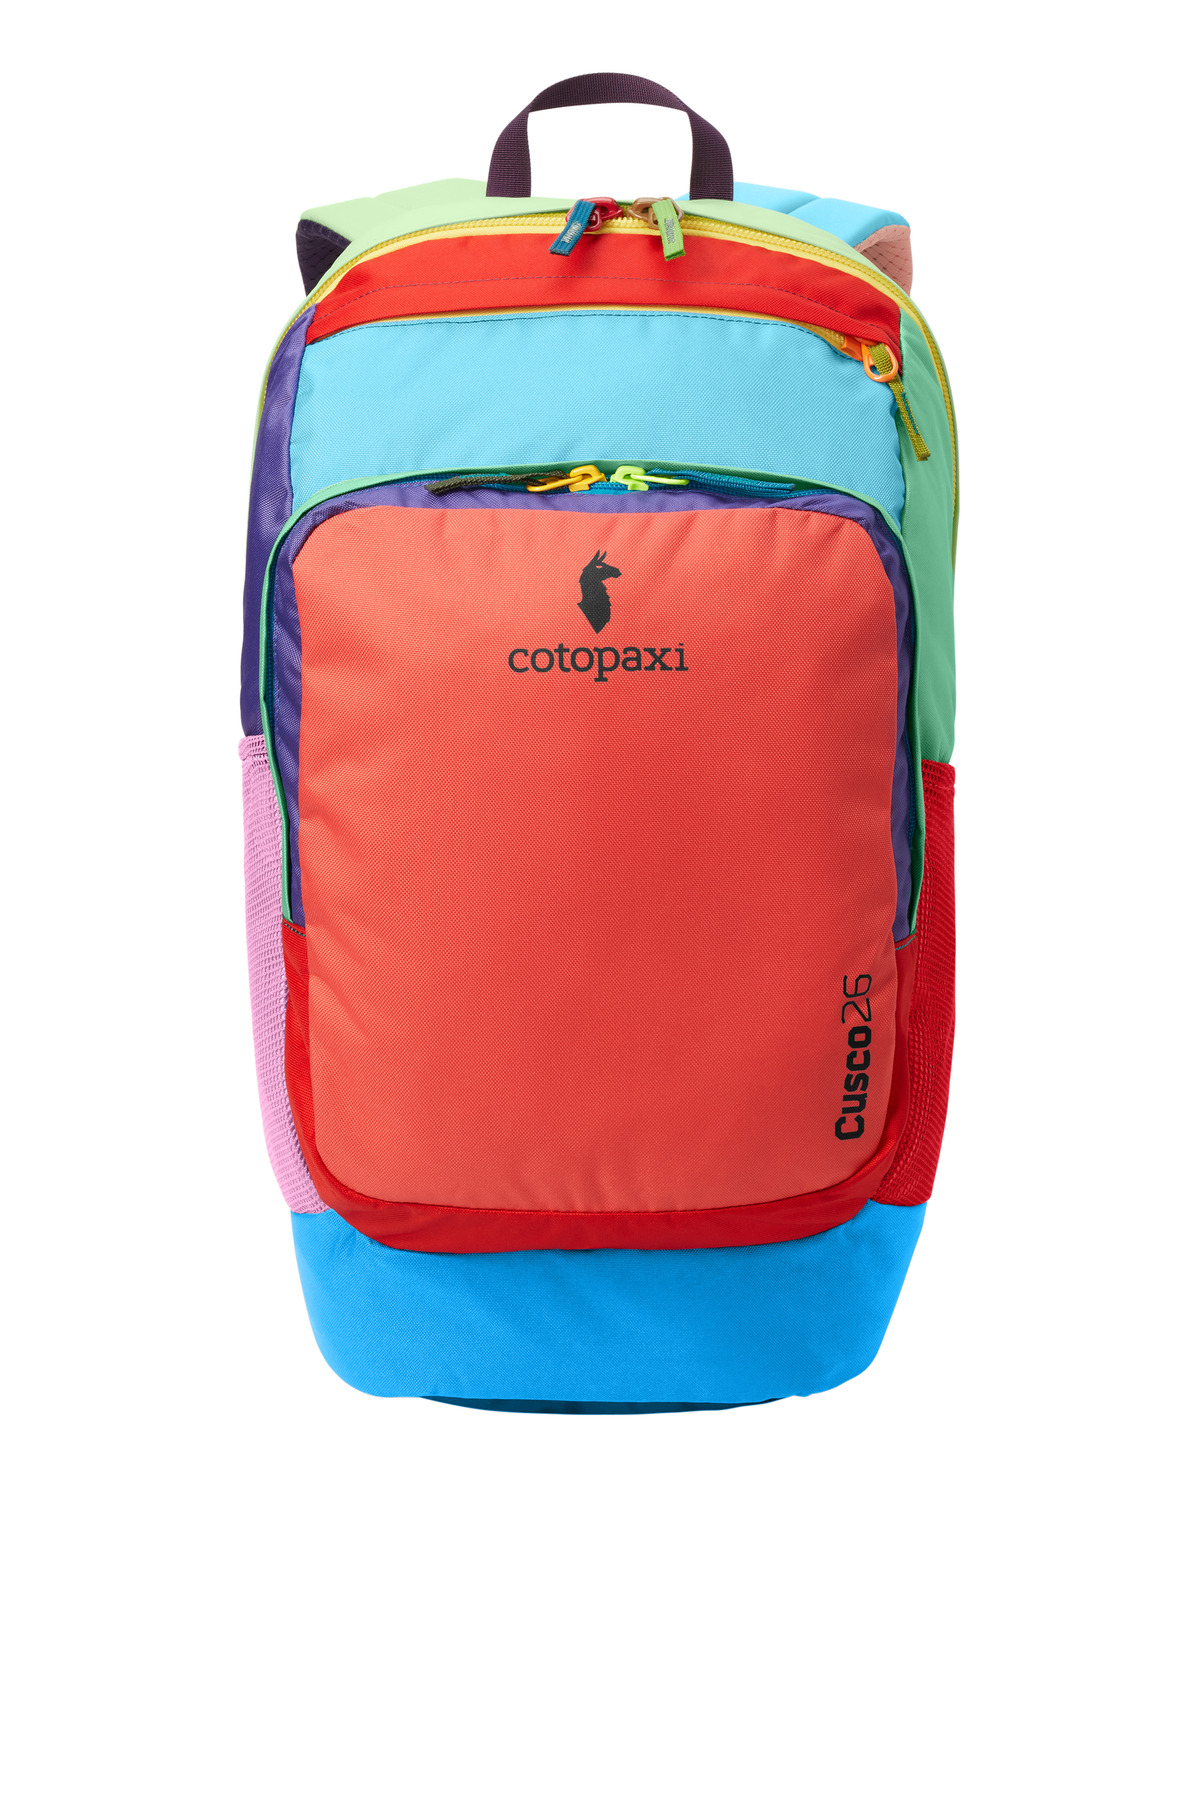 LIMITED EDITION Cotopaxi Cusco 26L Backpack-Cotopaxi